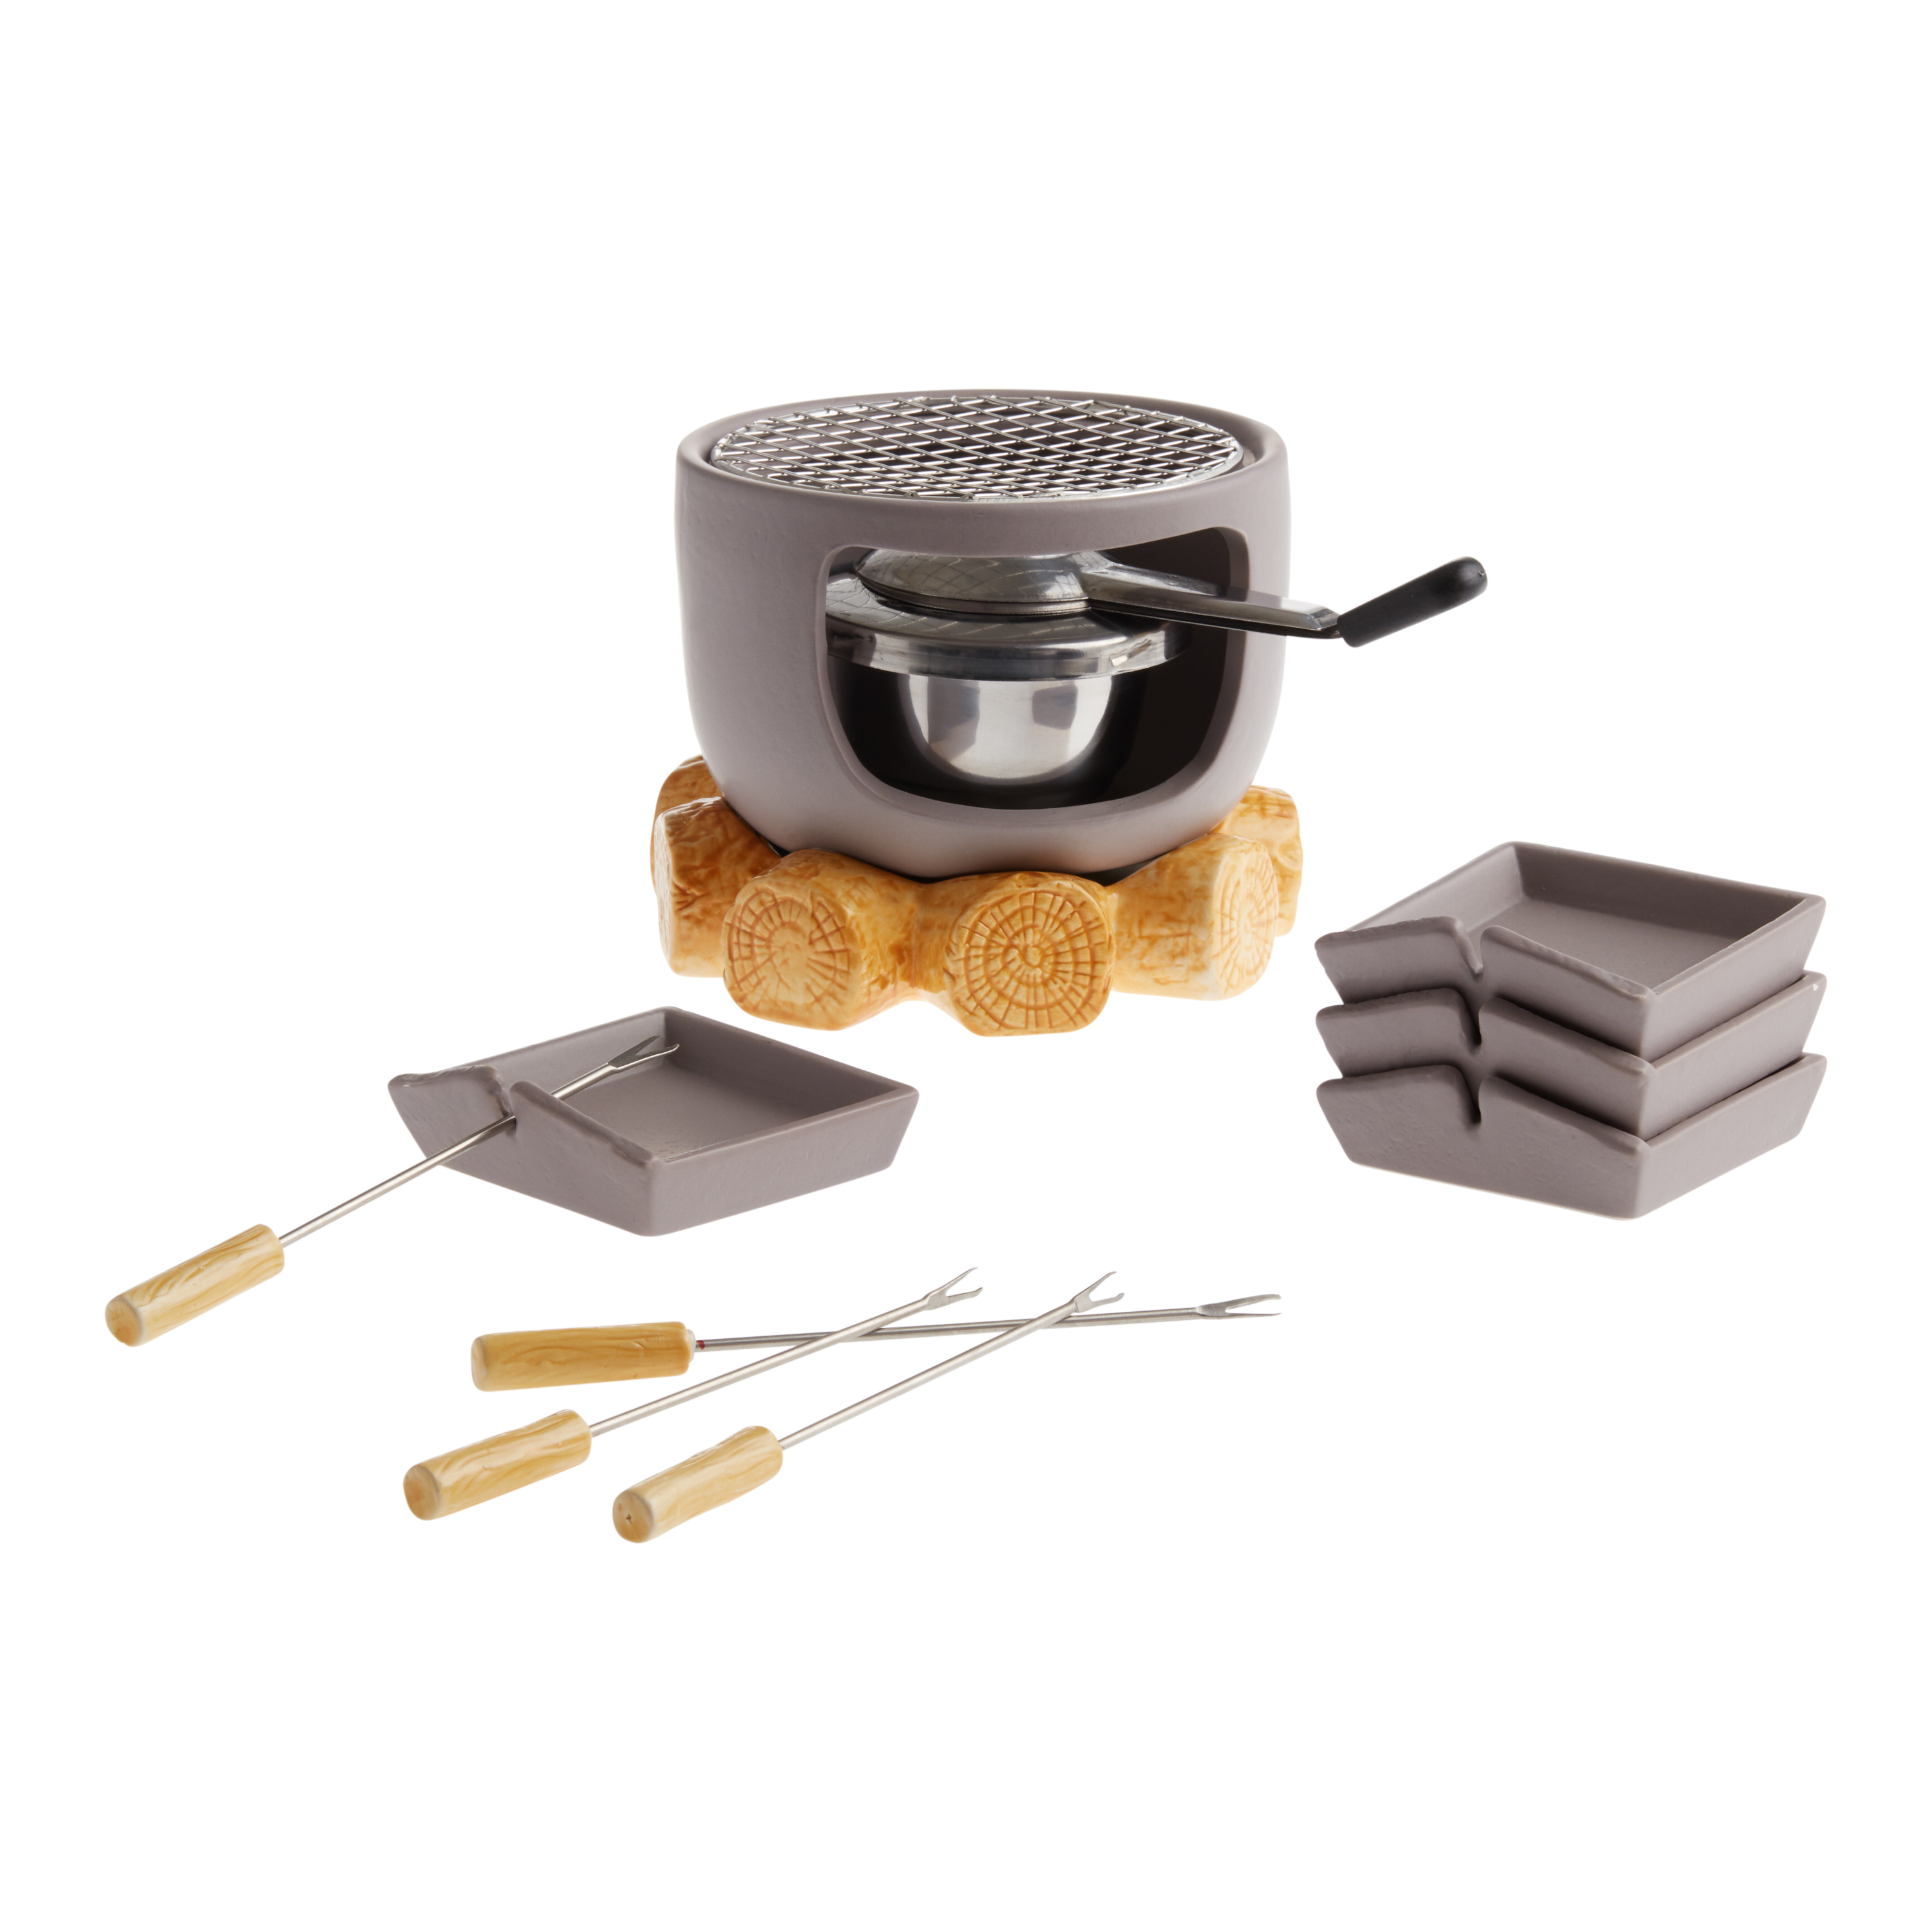 Small Red Ceramic Fondue Pot and Forks 5 Piece Gift Set - World Market